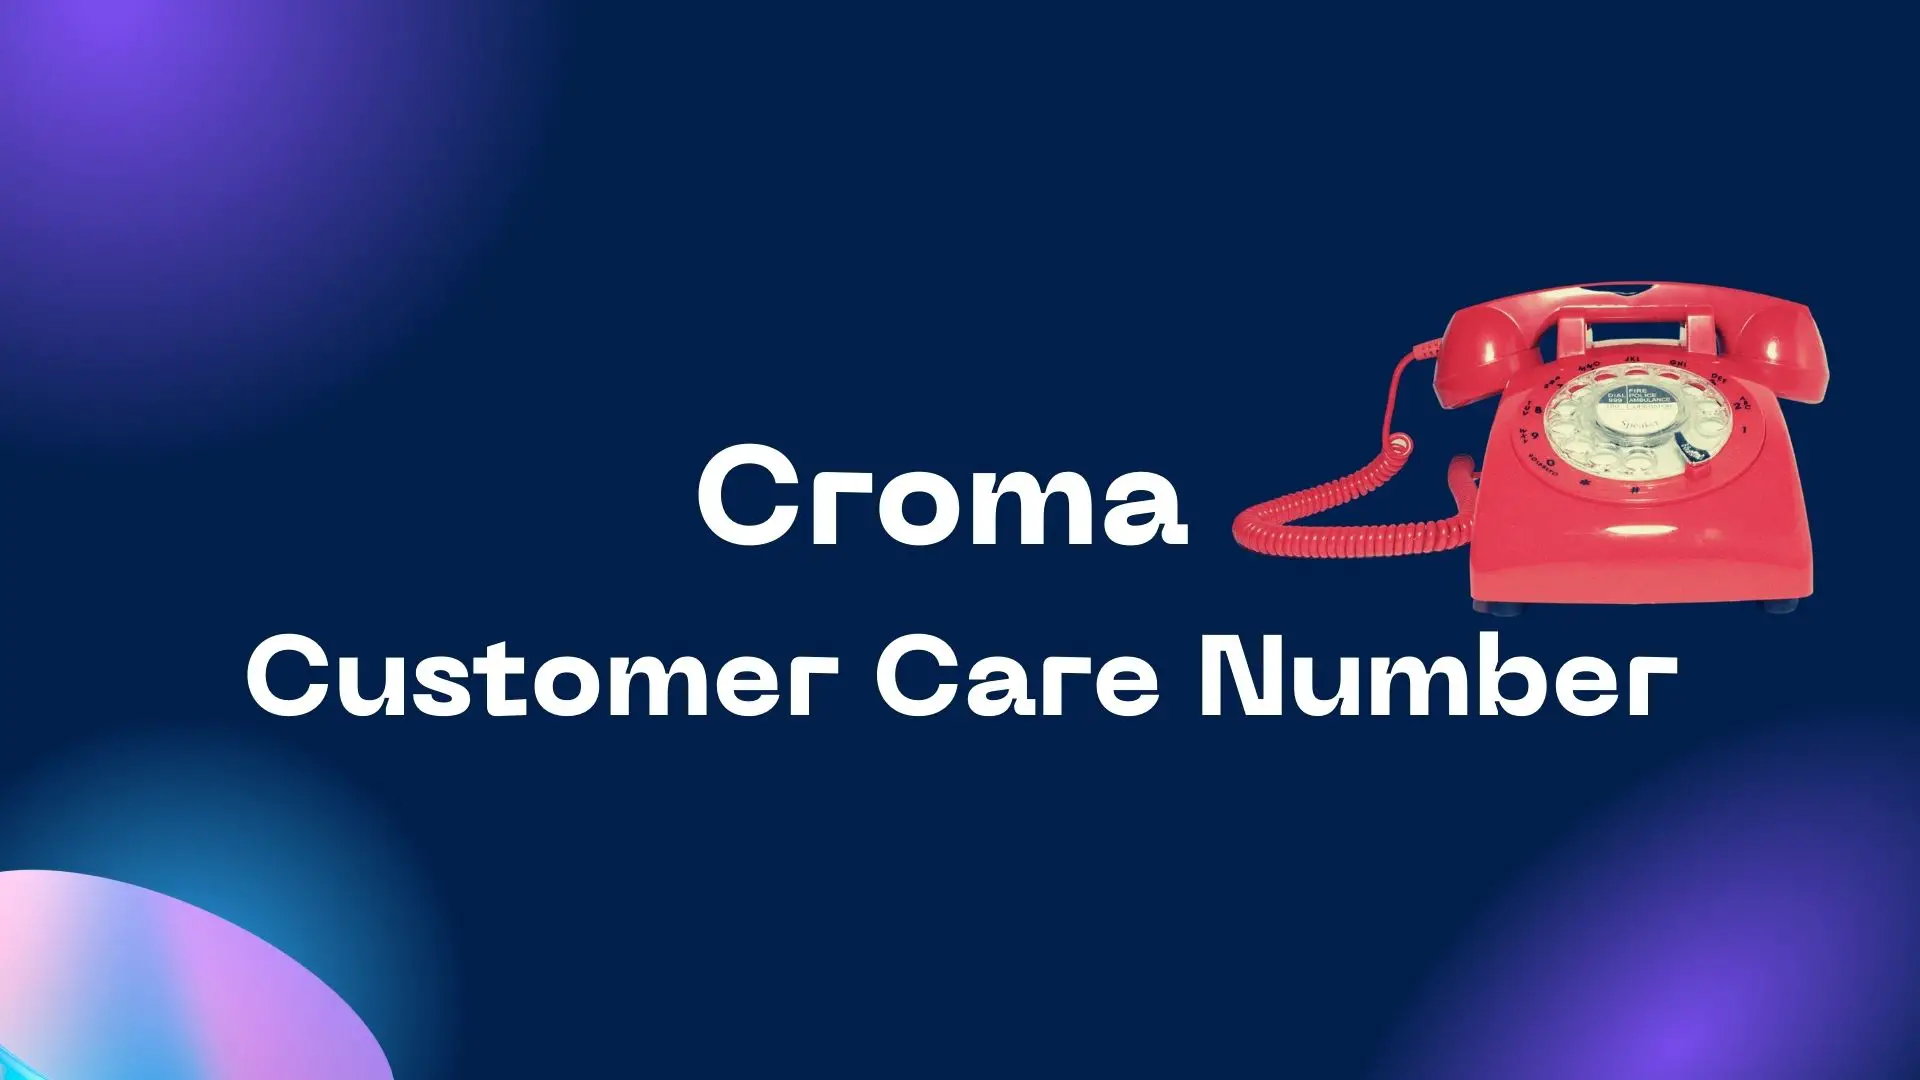 Croma Customer Care Number